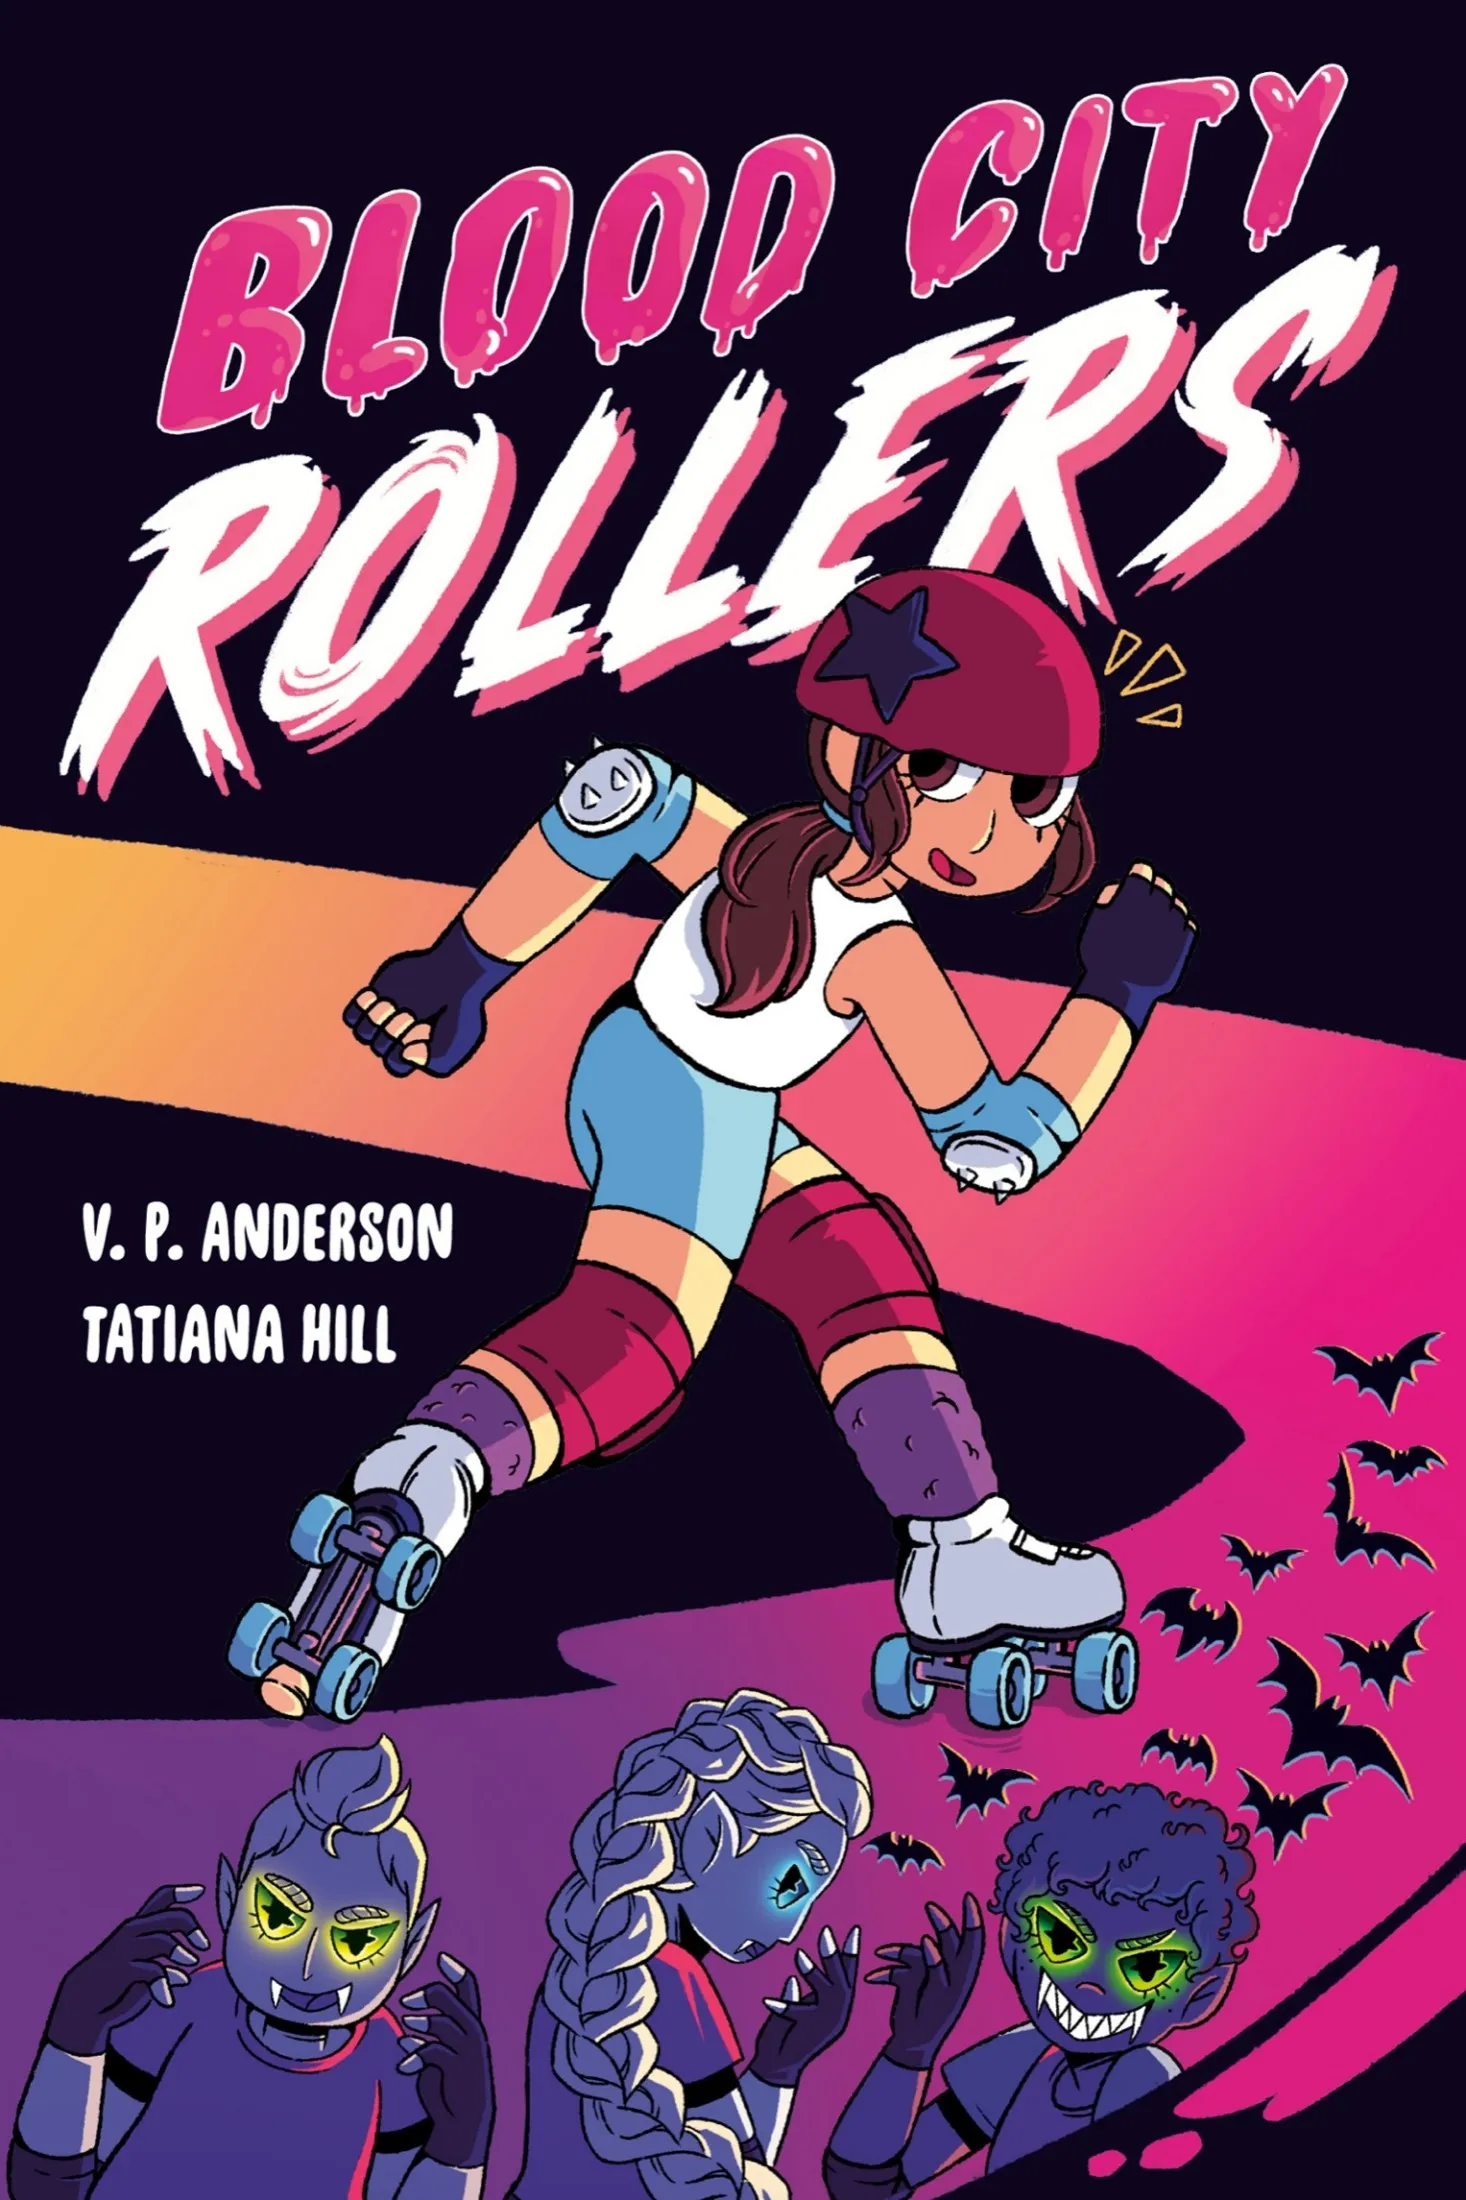 Blood City Rollers (Blood City Rollers #1)